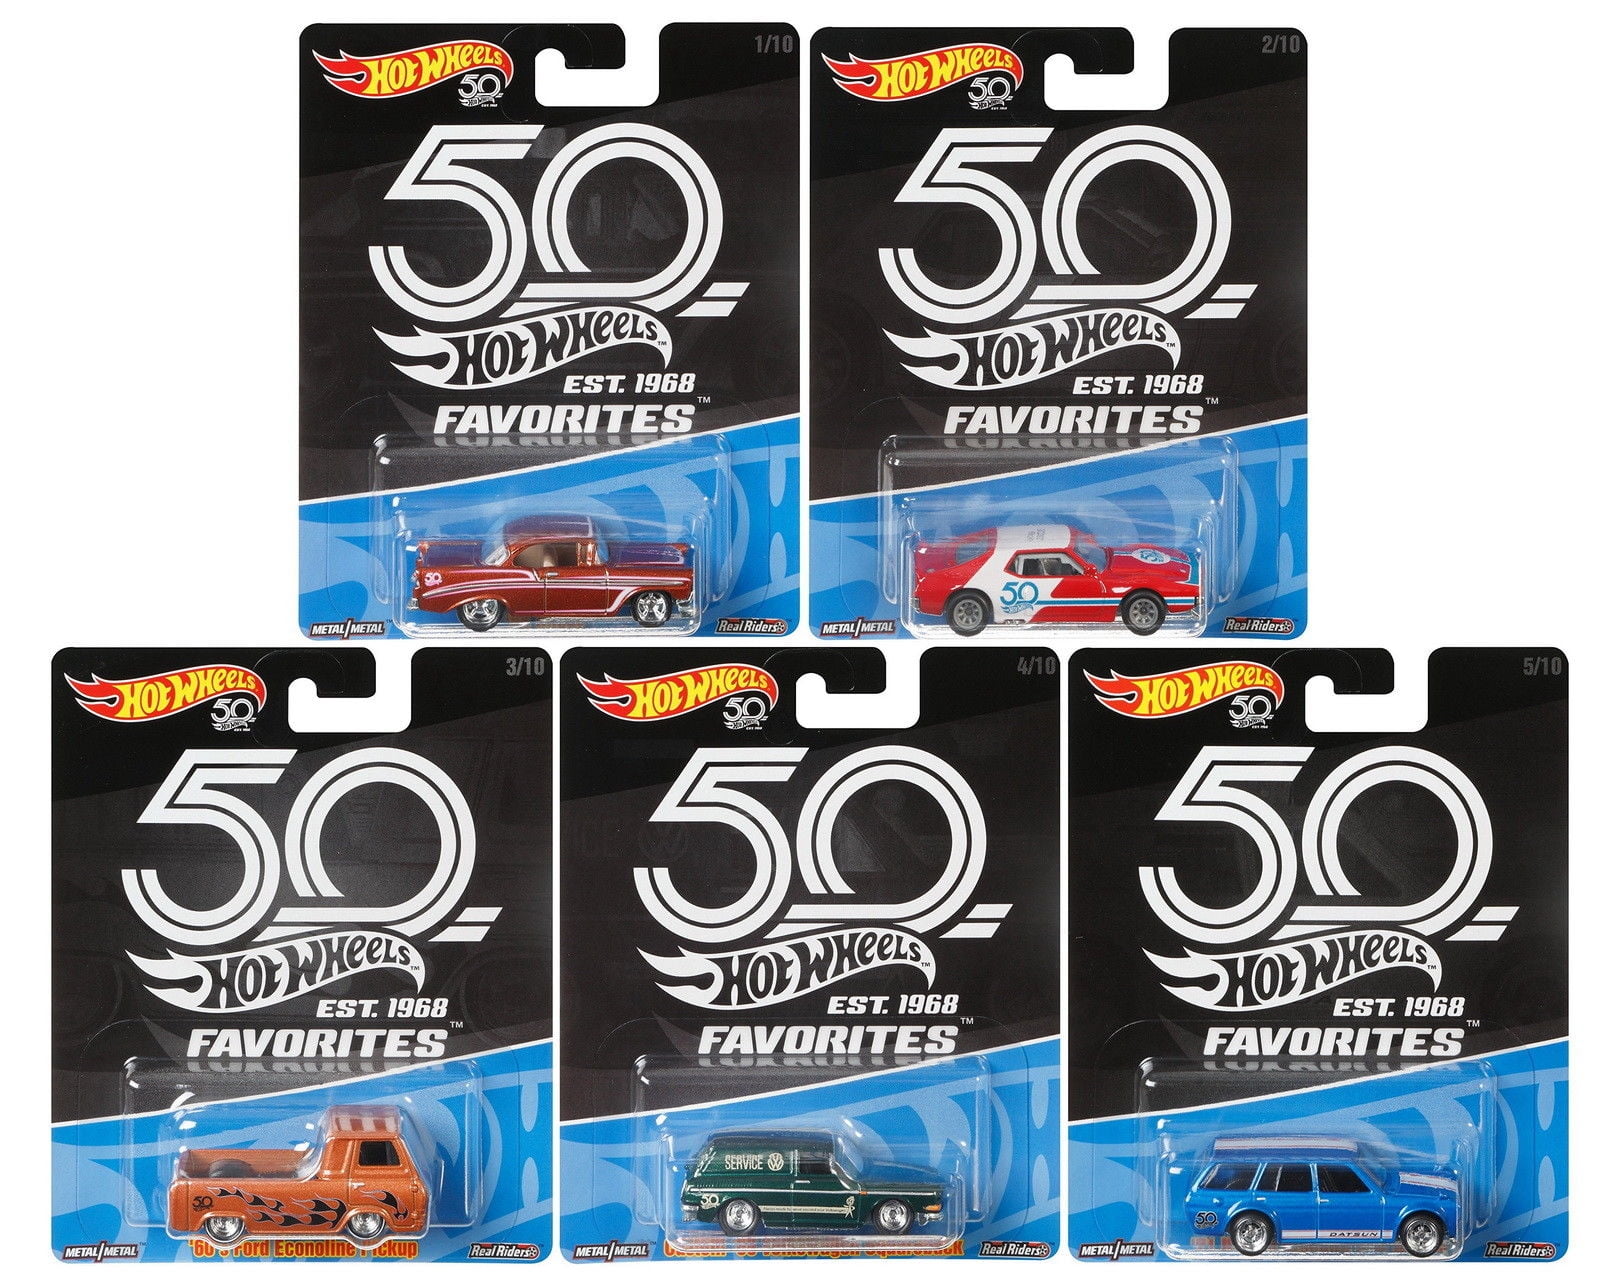 2018 Hot Wheels 50th Anniversary Favorites Series Diecast Cars 1:64 Real Riders 